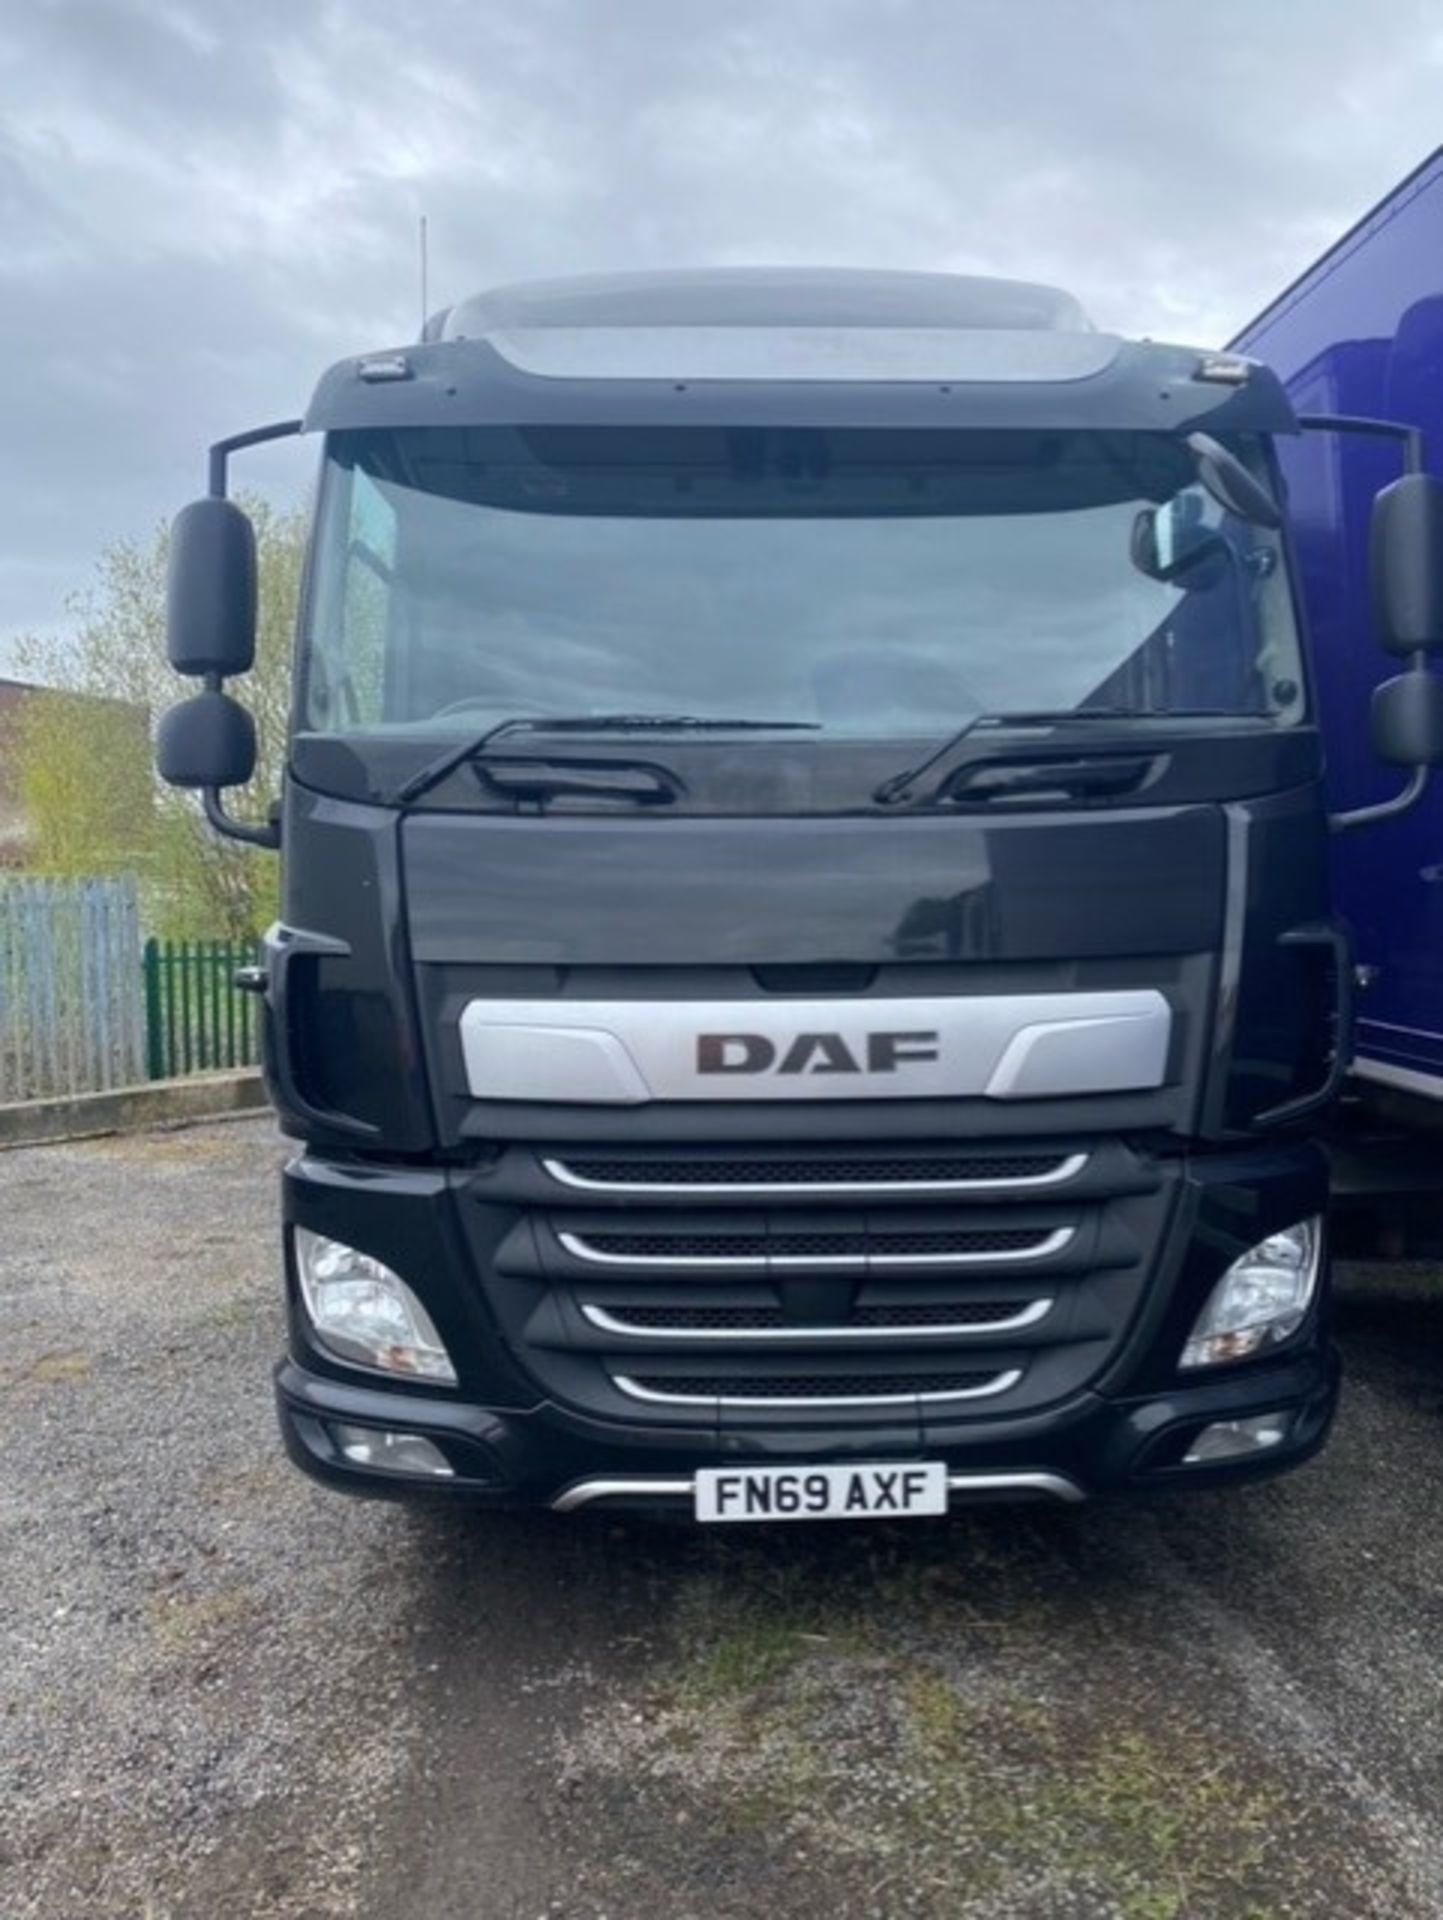 2019, DAF CF 260 FA (Ex-Fleet Owned & Maintained) - FN69 AXF (18 Ton Rigid Truck with Tail Lift) - Image 7 of 8